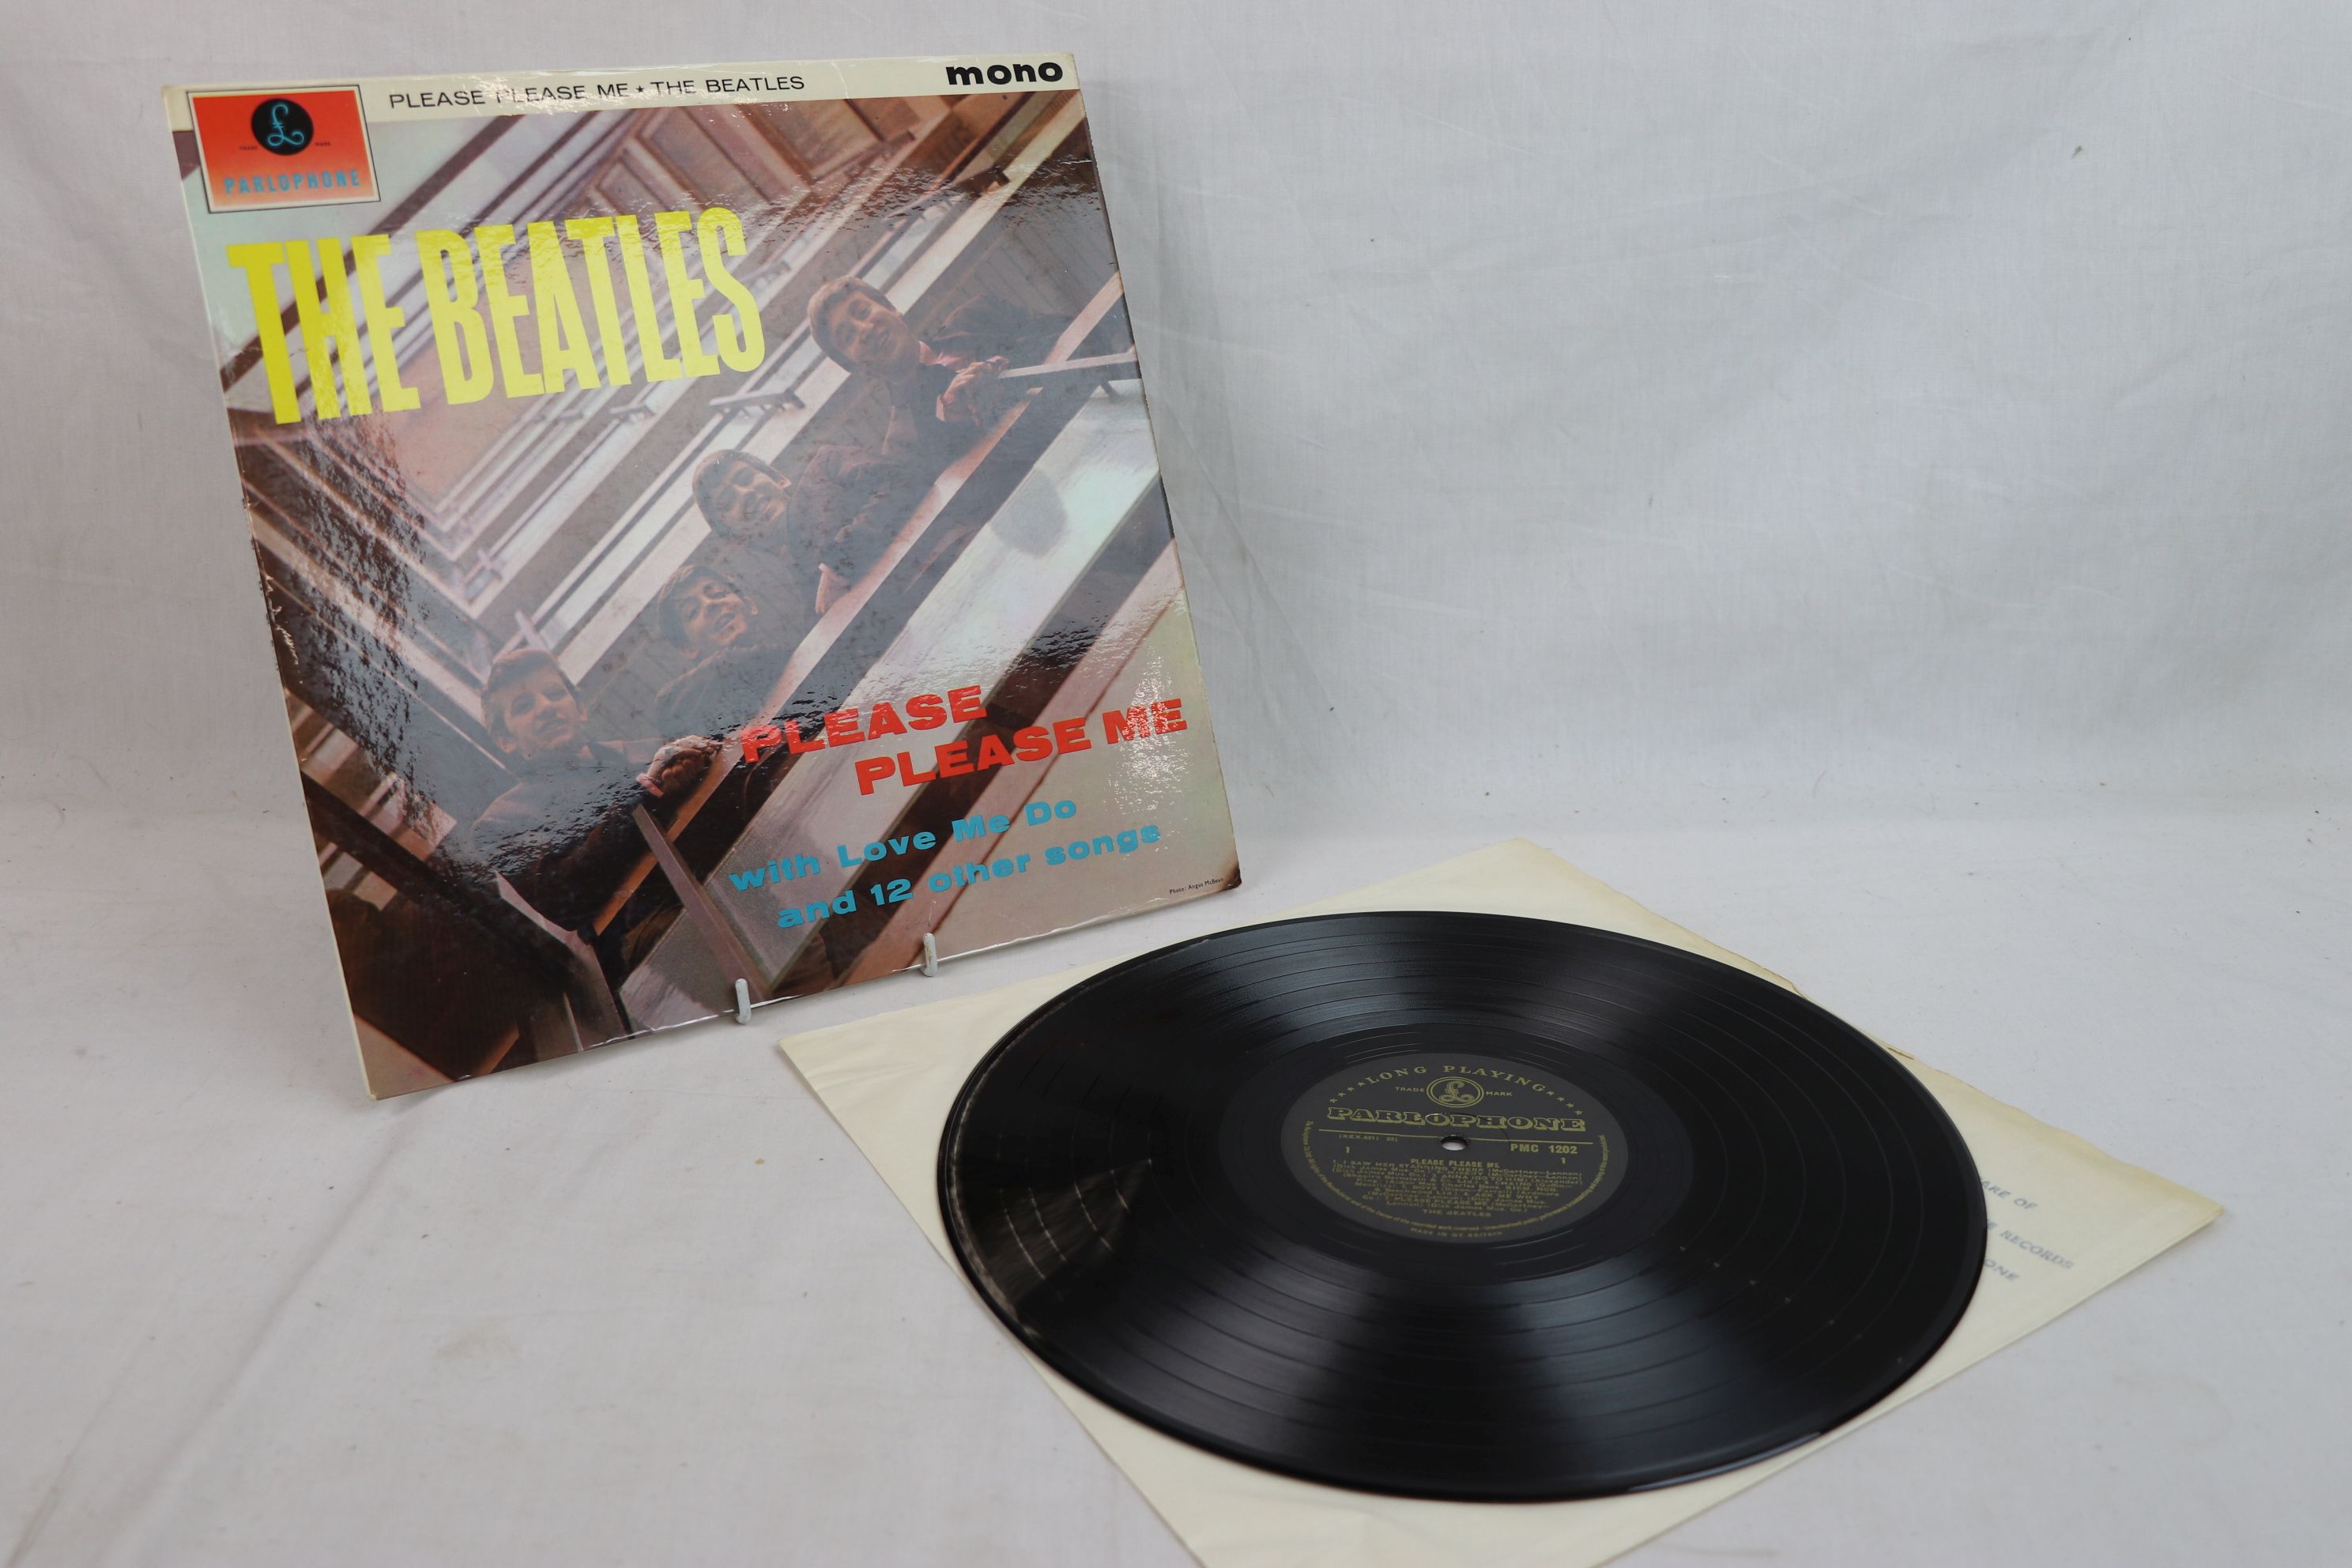 Vinyl - The Beatles Please Please Me LP on Parlophone PMC1202 gold and black label, Dick James Music - Image 4 of 10